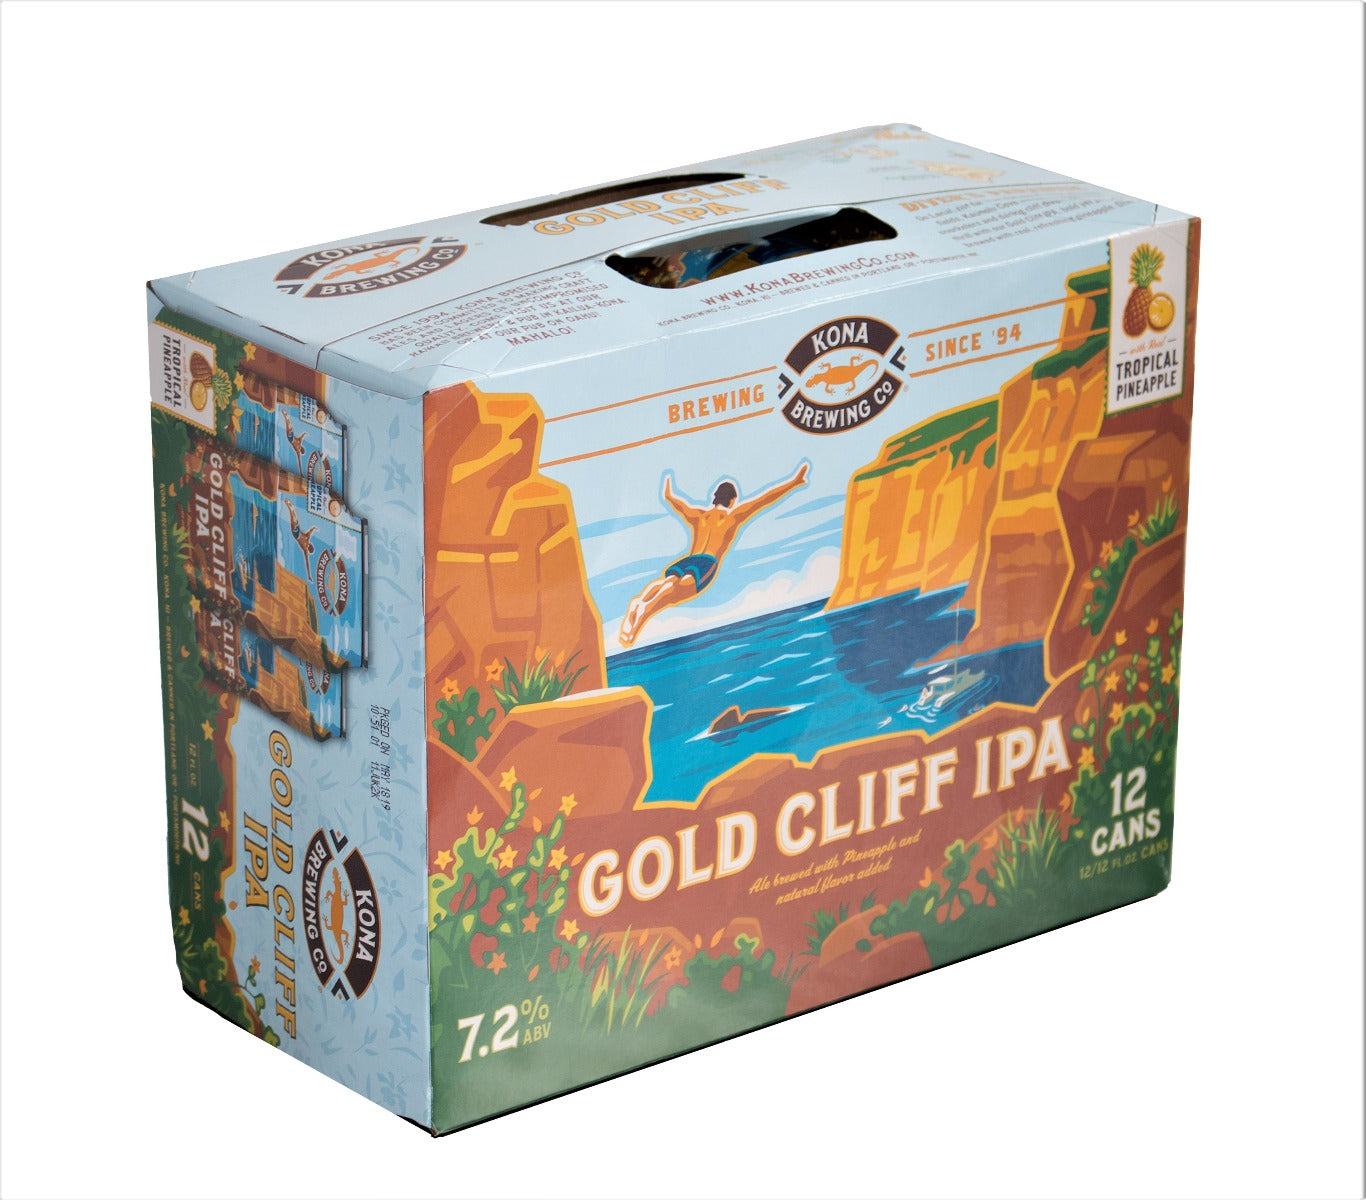 GOLD CLIFF IPA 12X12OZ CANS